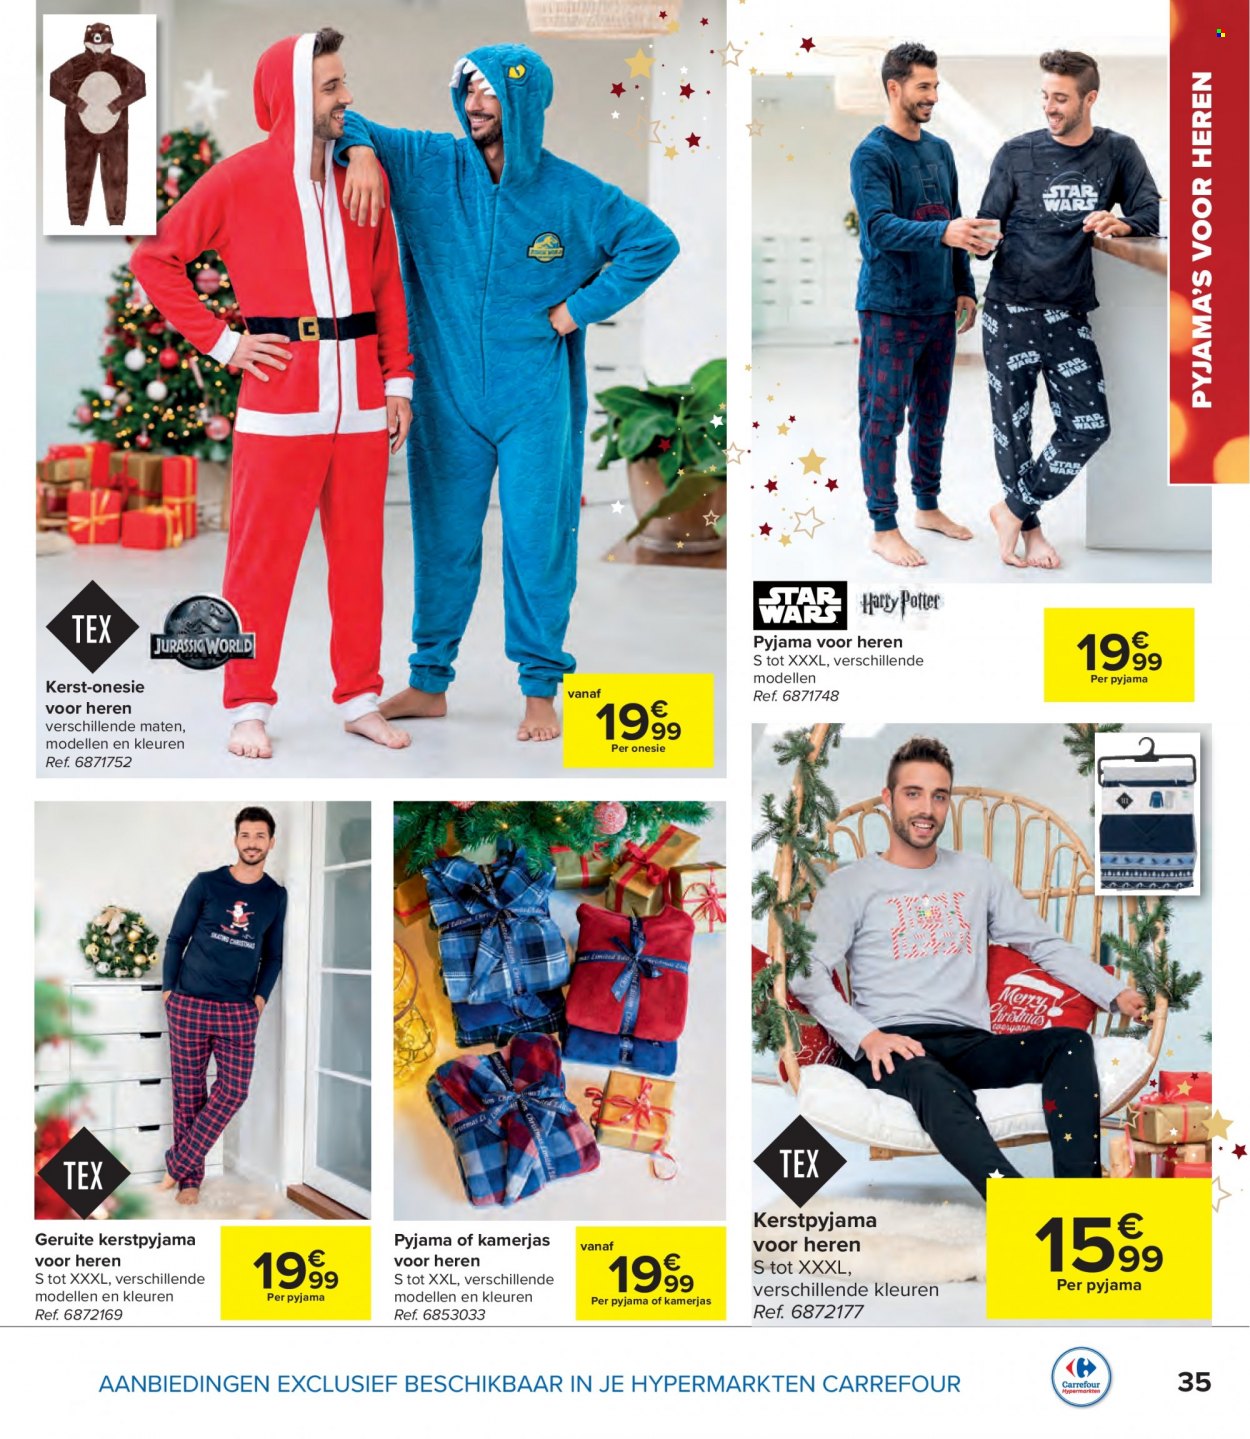 Catalogue Carrefour hypermarkt - 16.11.2022 - 31.12.2022. Page 35.